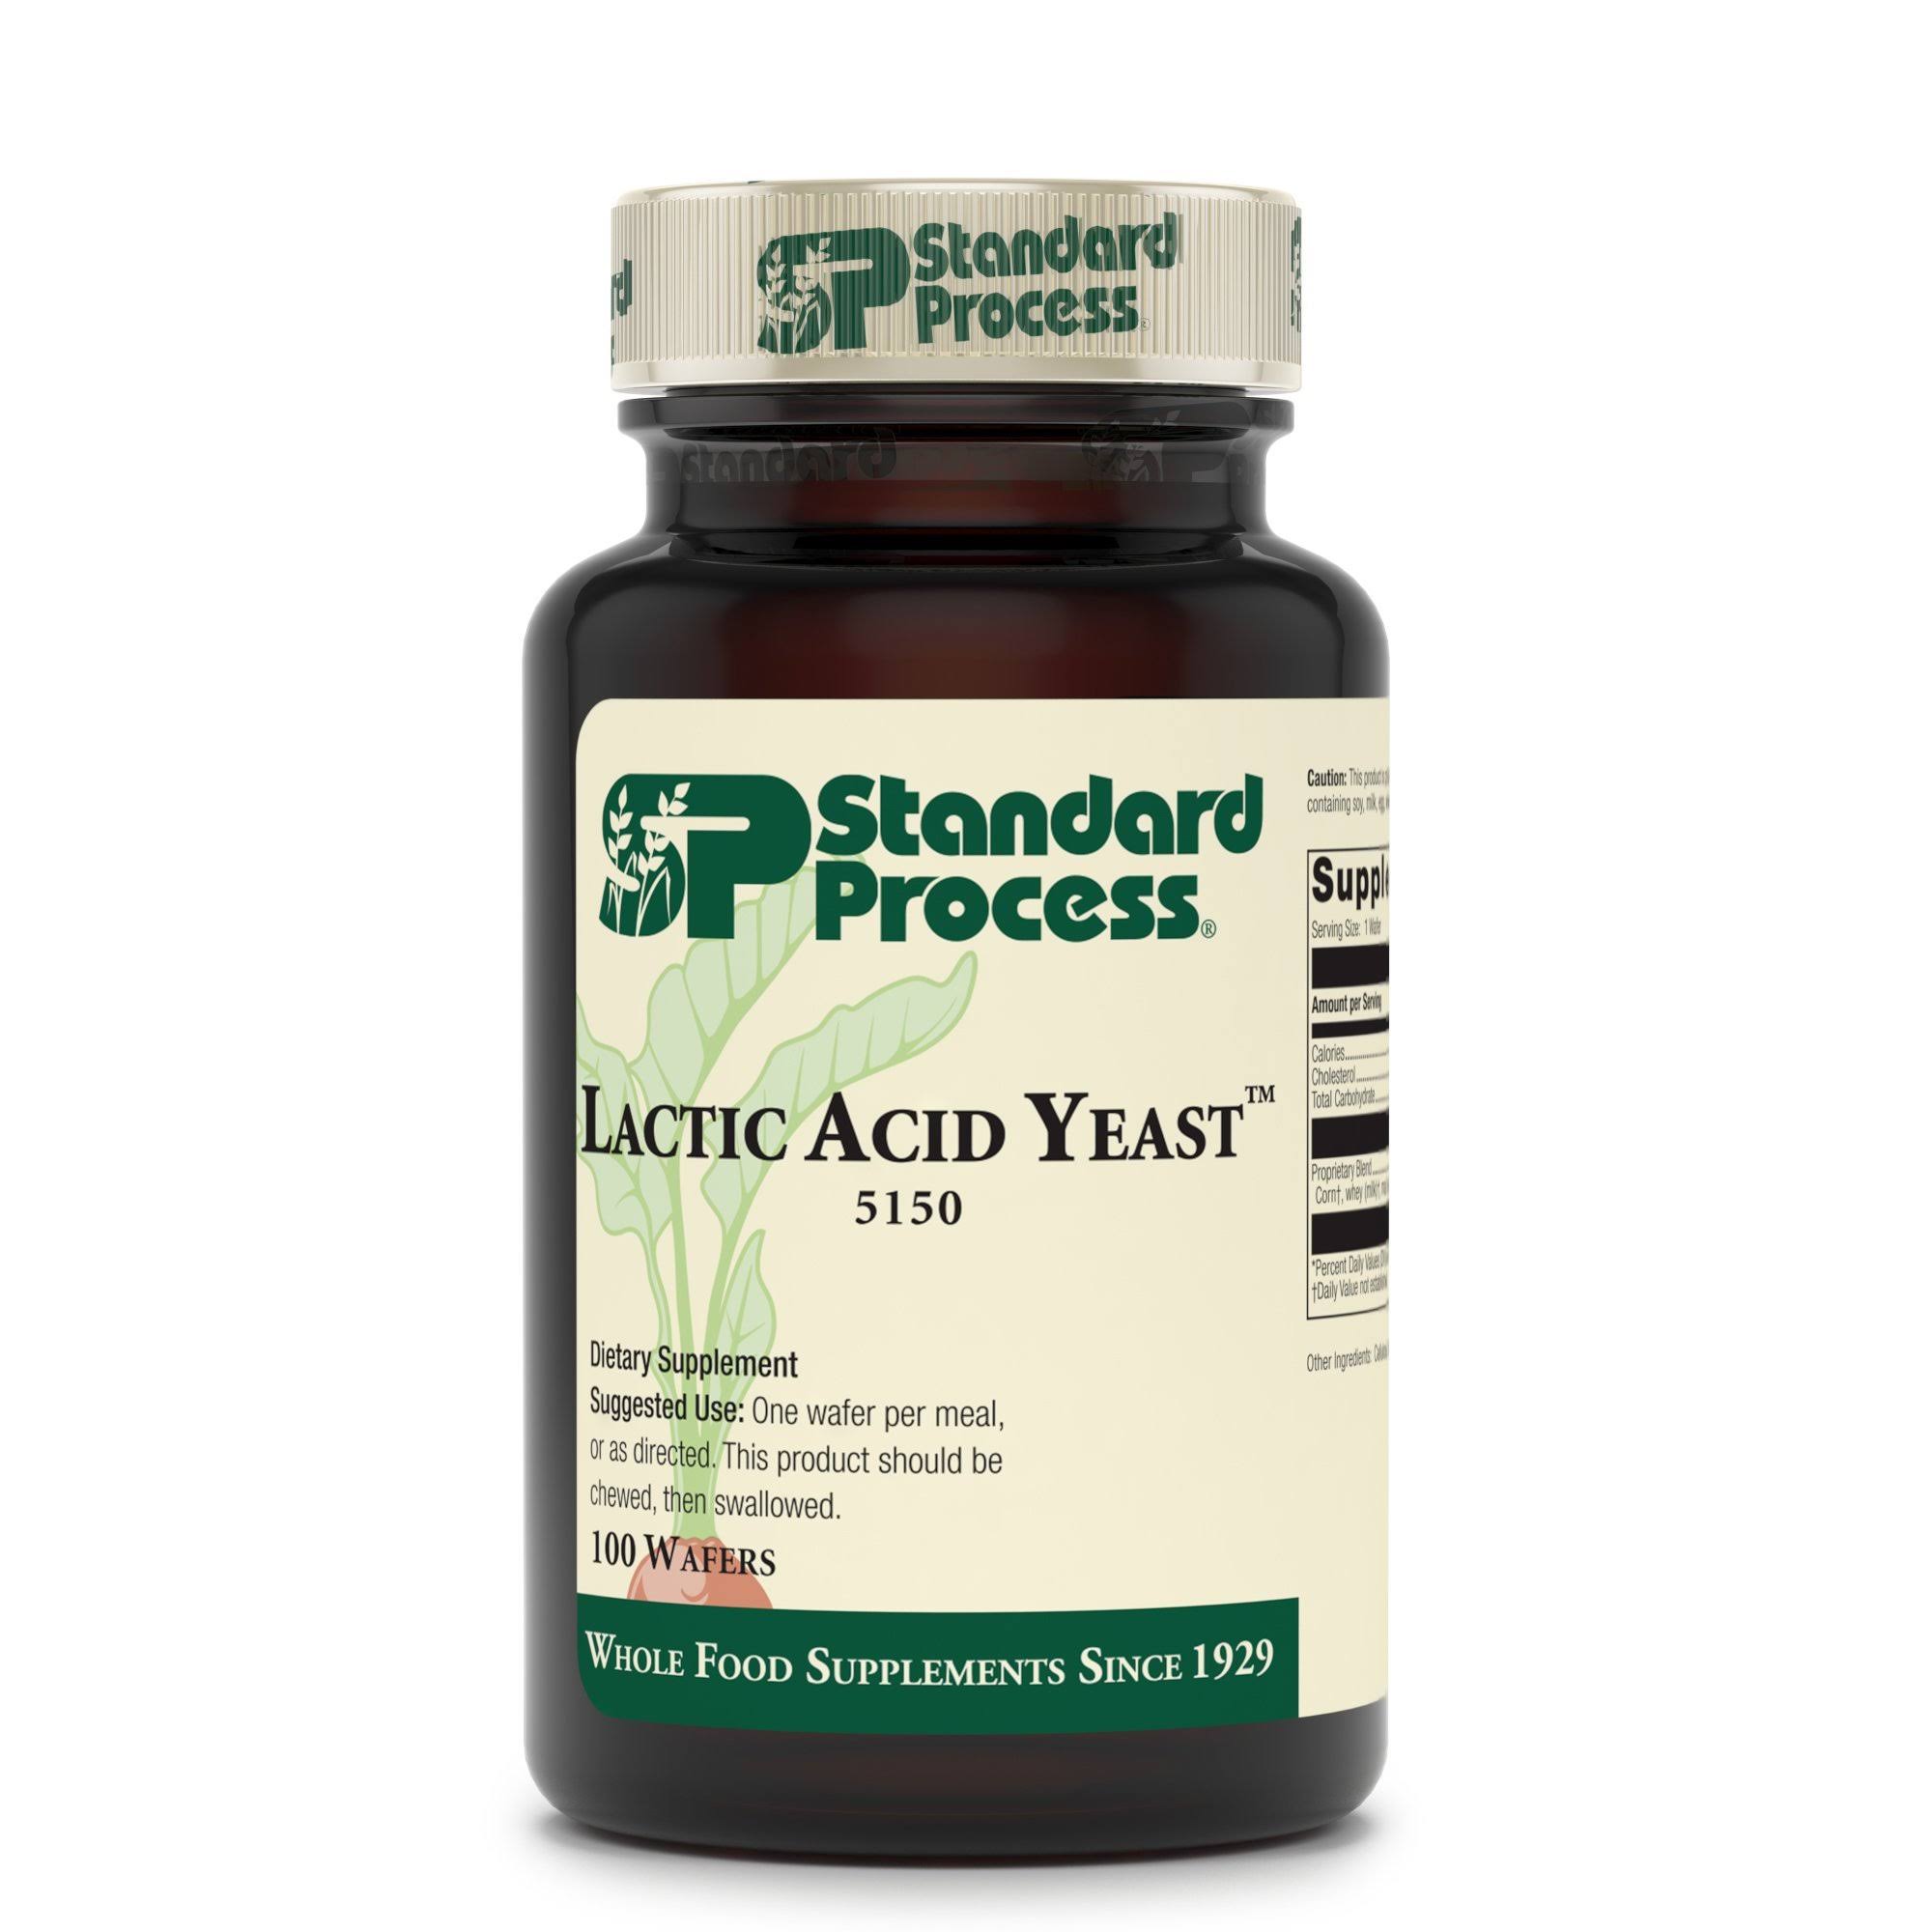 Standard Process Lactic Acid Yeast - Whole Food GI, Digestion and Dige